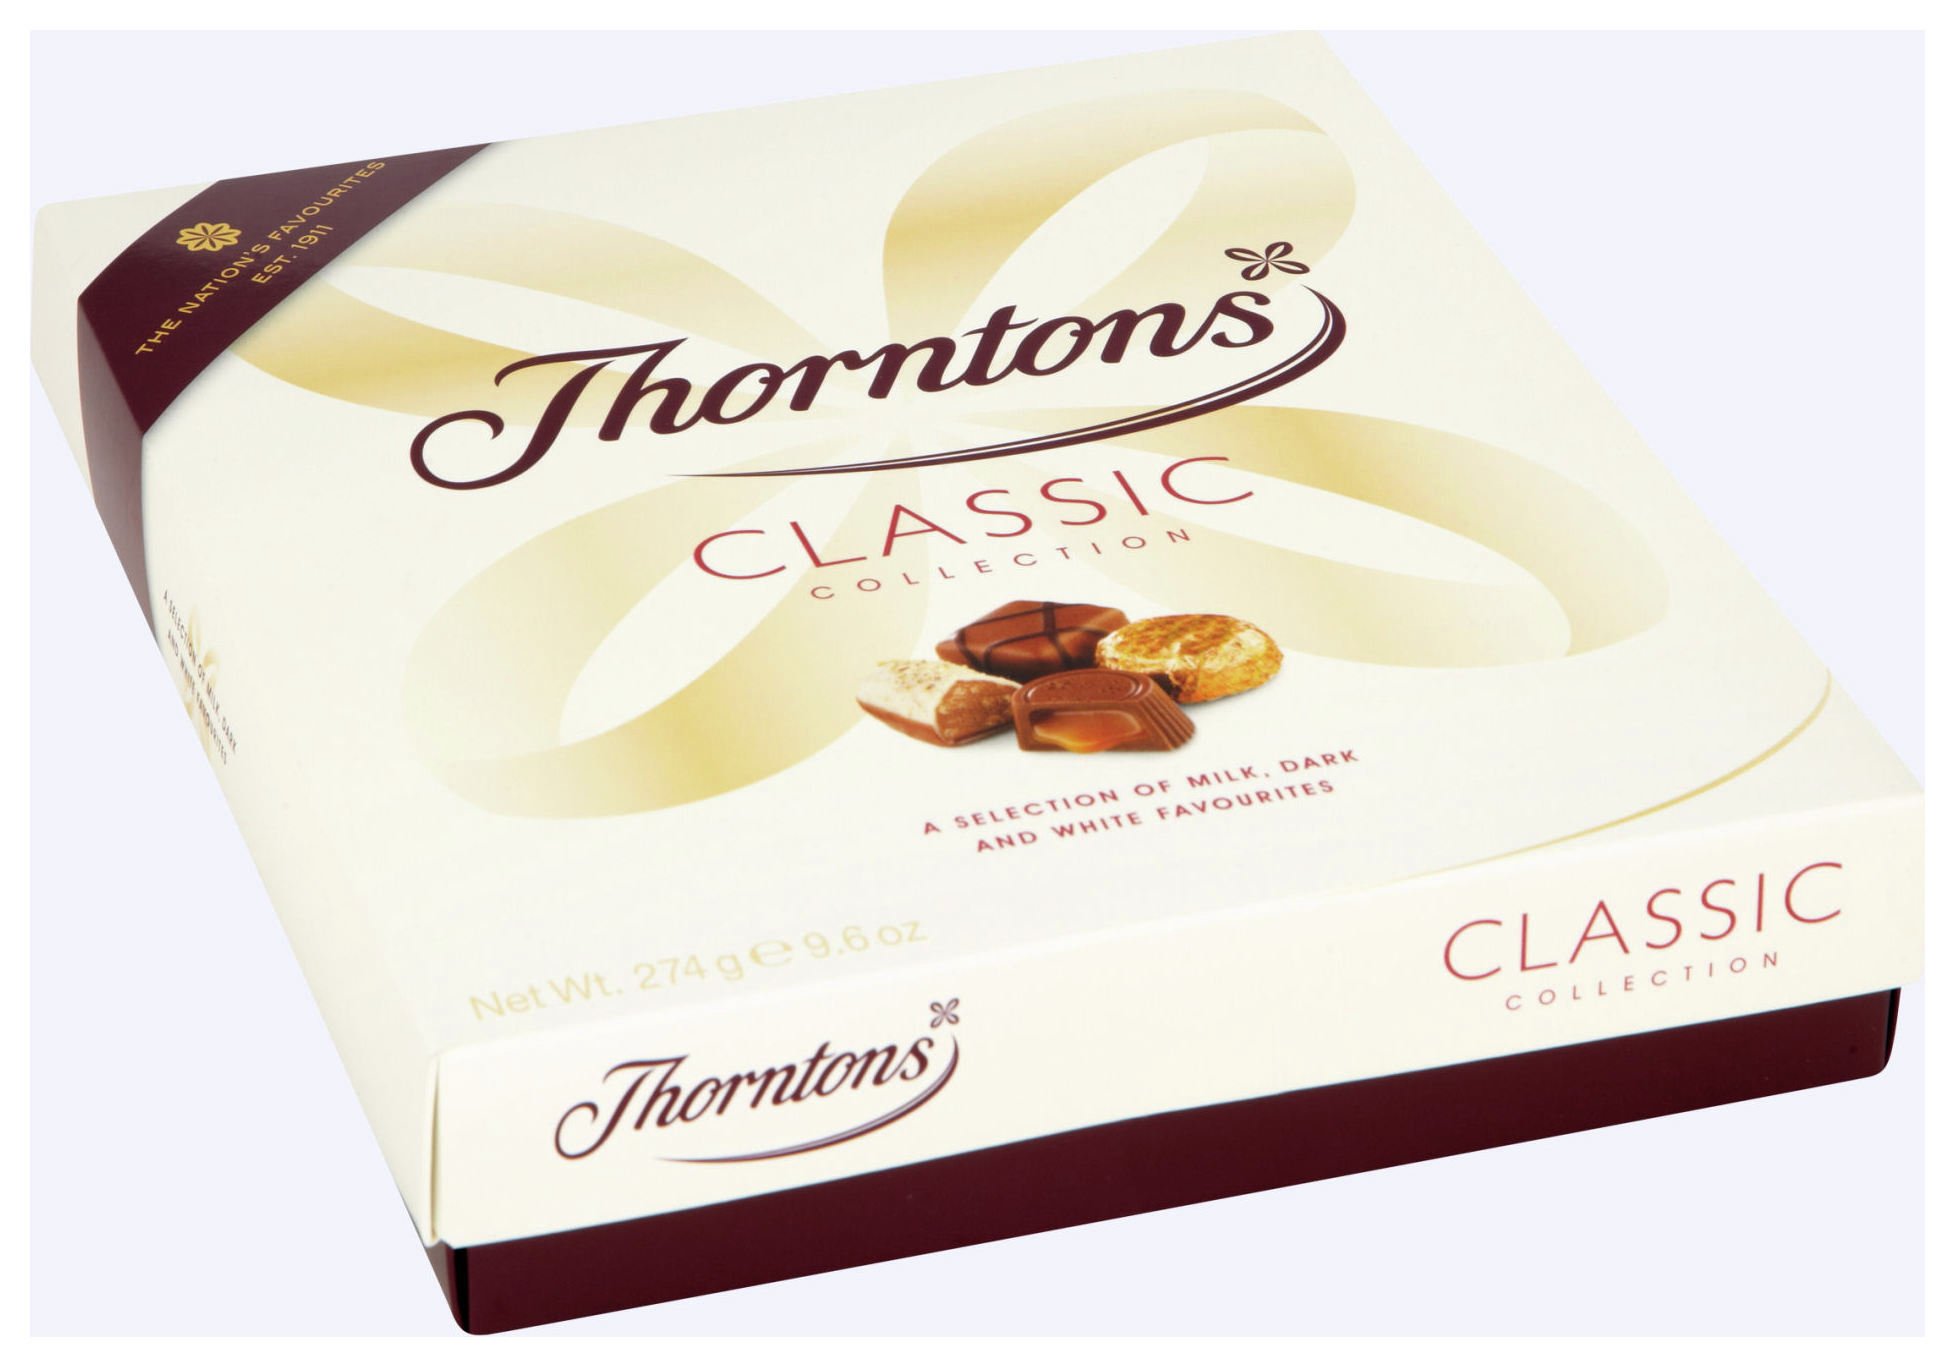 Thorntons Classic Collection. Review